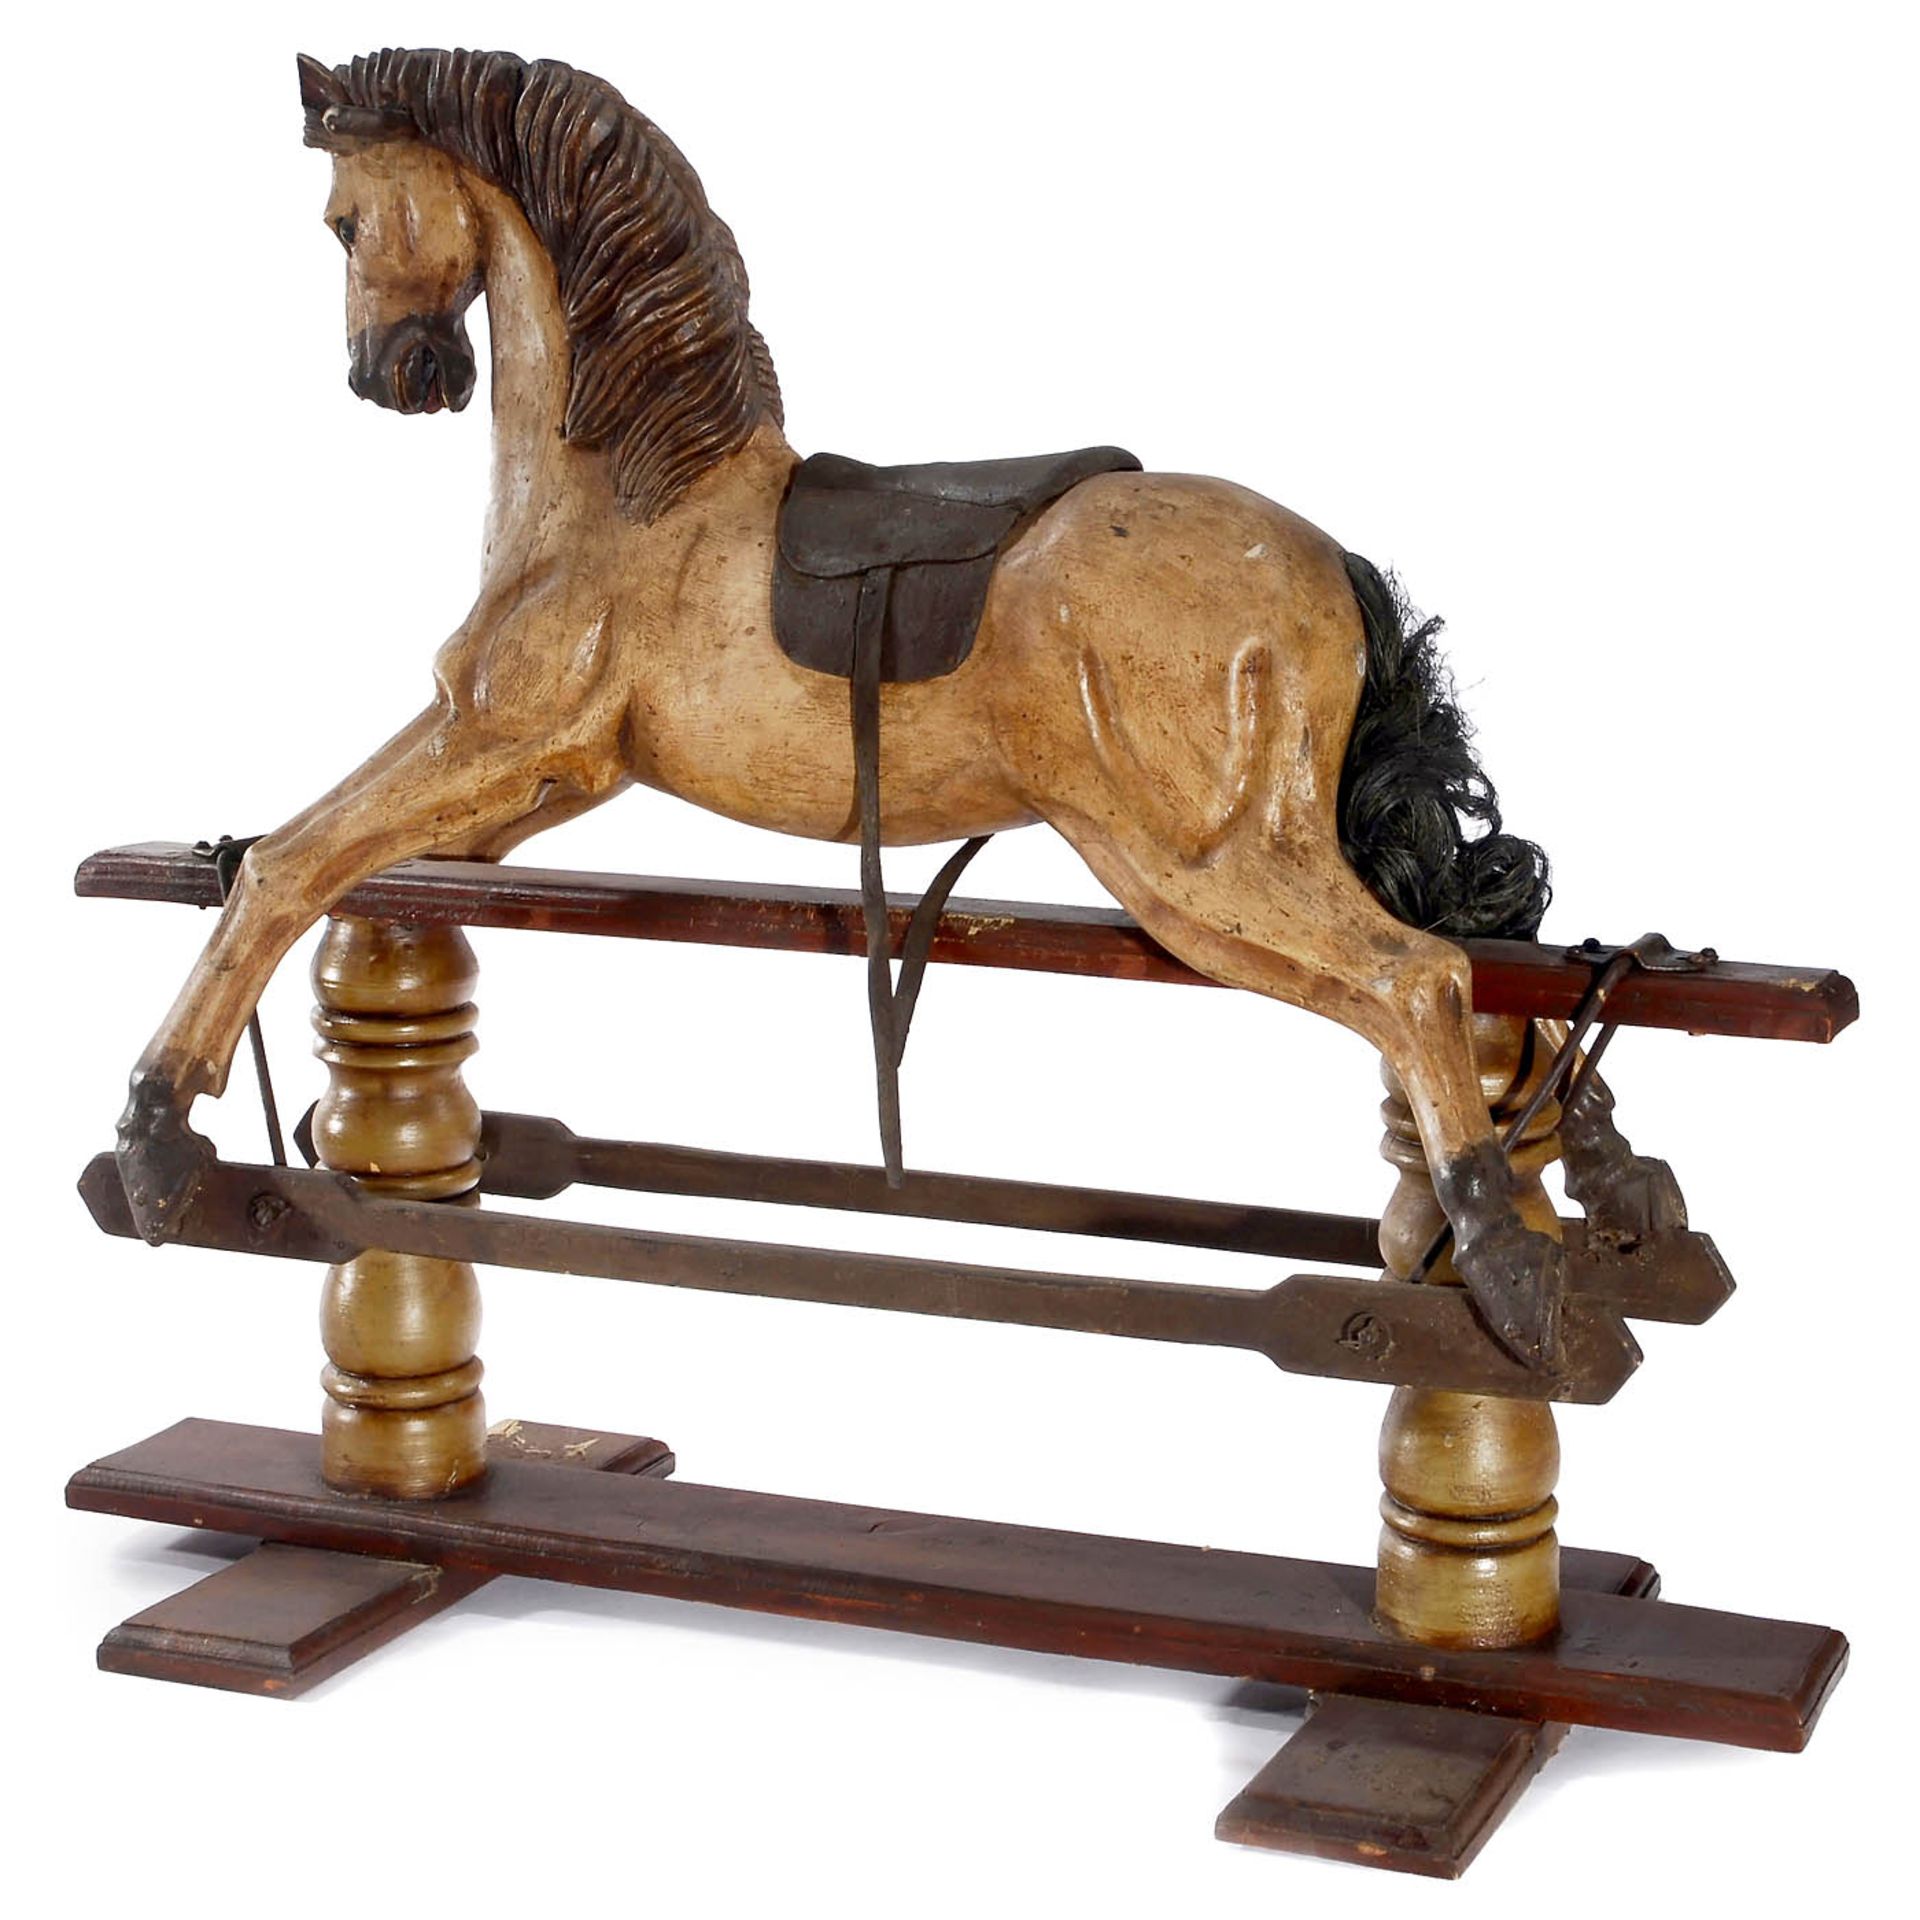 Rocking Horse on Safety Stand - Image 2 of 2